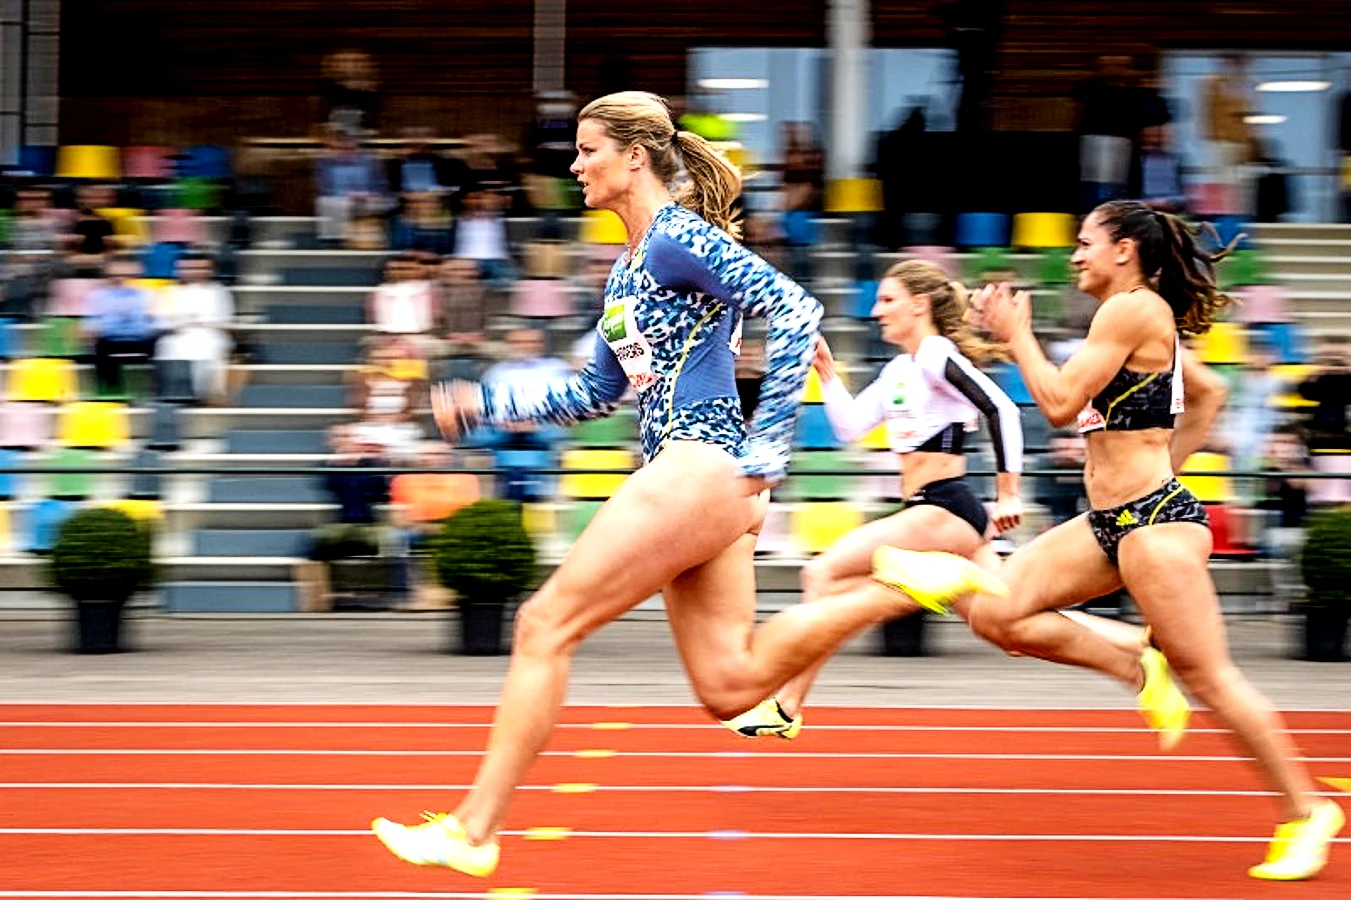 Dafne Schippers takes on strong 100m field at Fanny Blankers-Koen Games